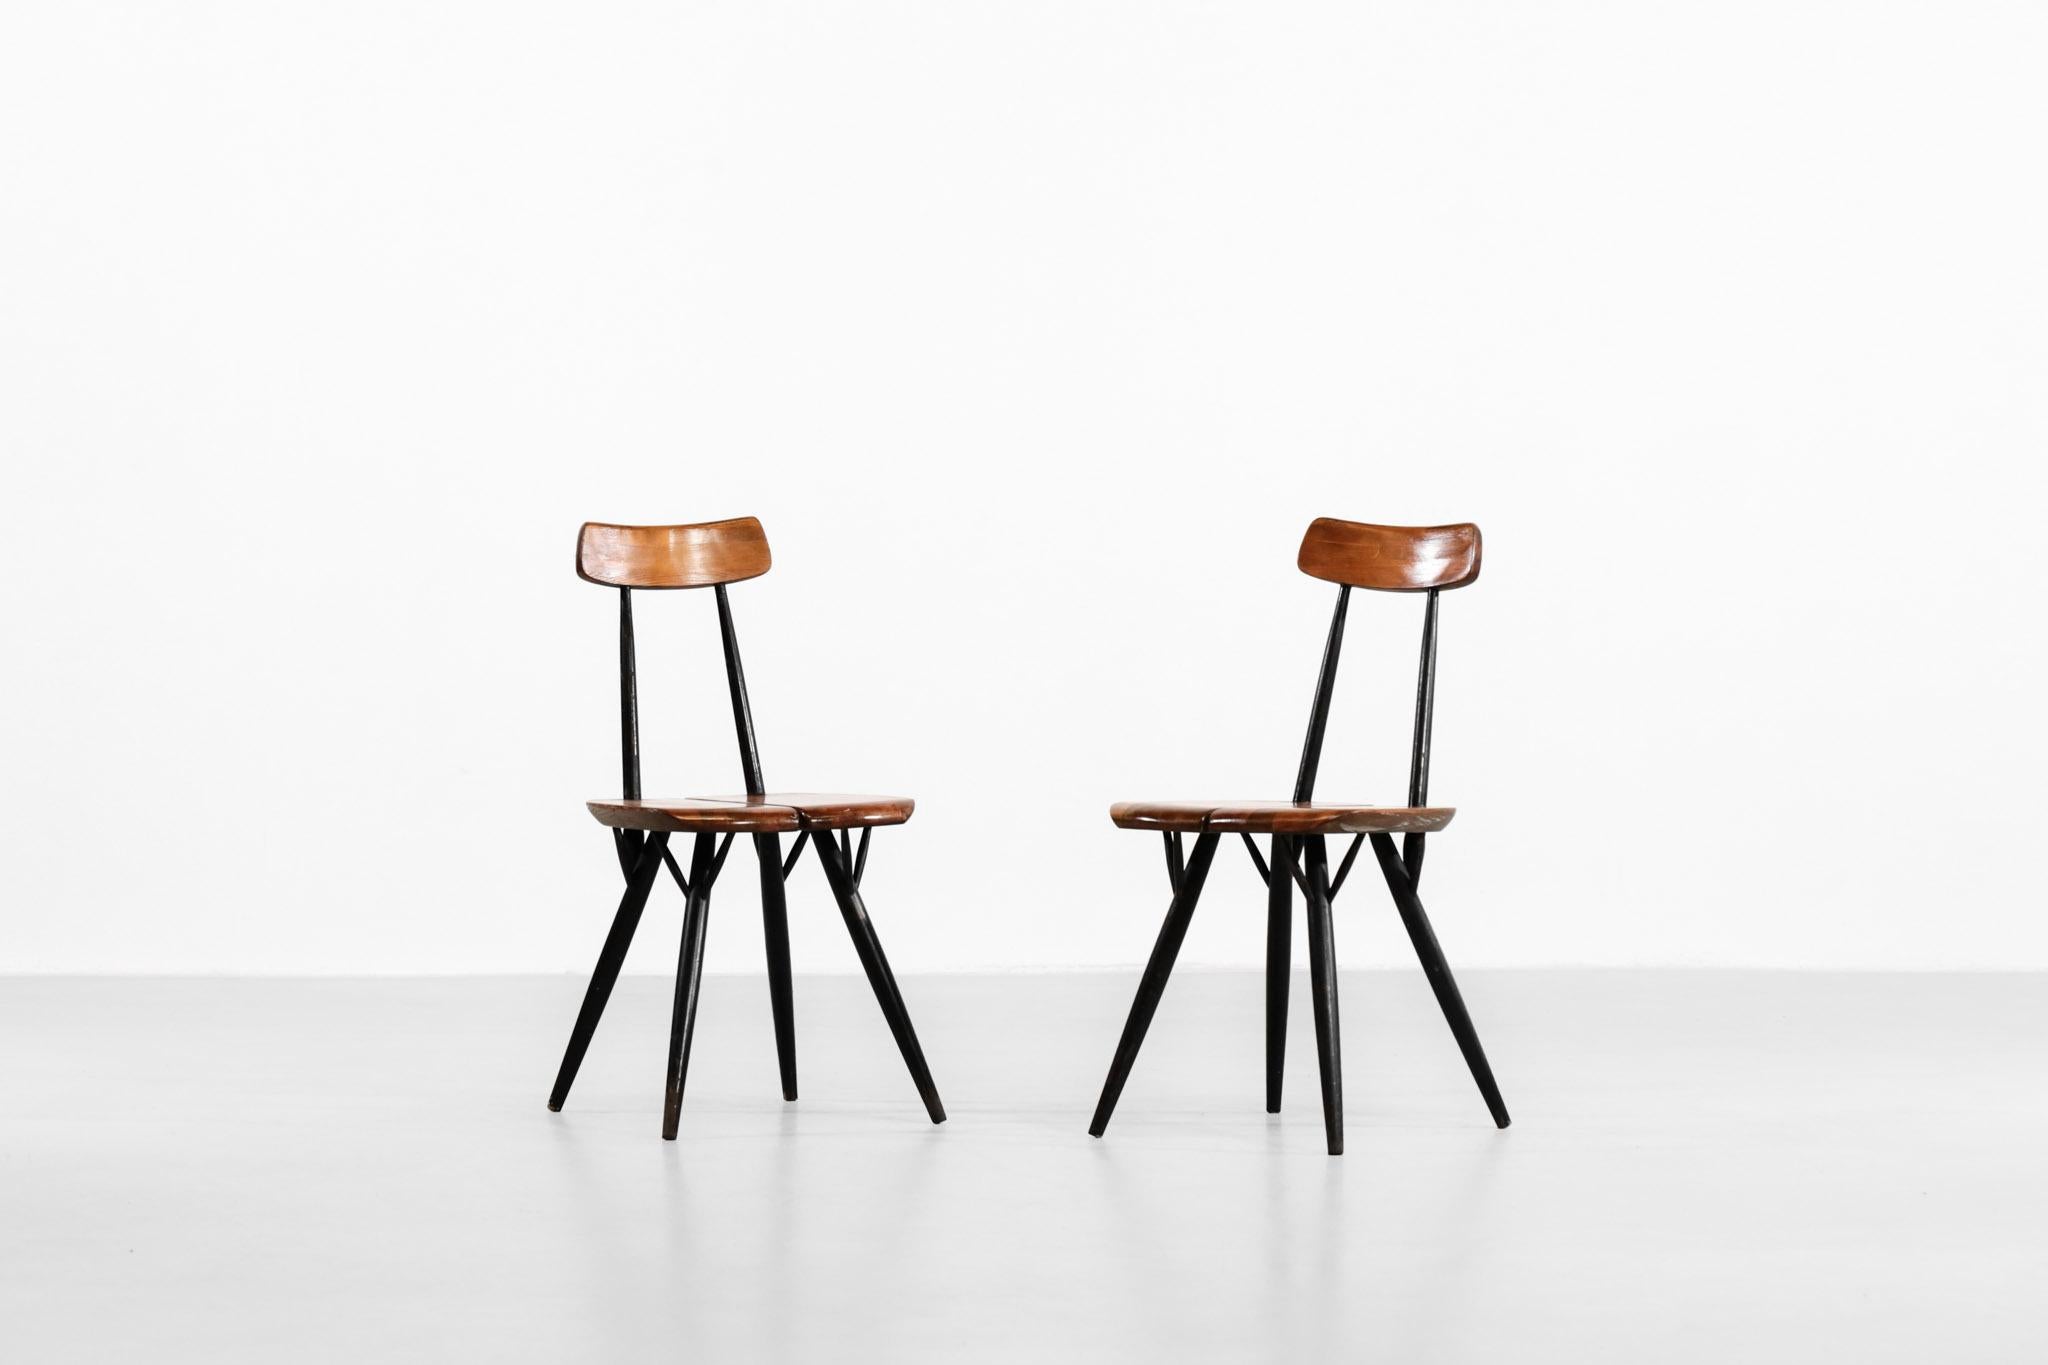 Pair of Pirkka chairs designed by Swedish designer Ilmari Tapiovaara. Made of beechwood painted in black with a seat in pine. Wear consistent with age and use.